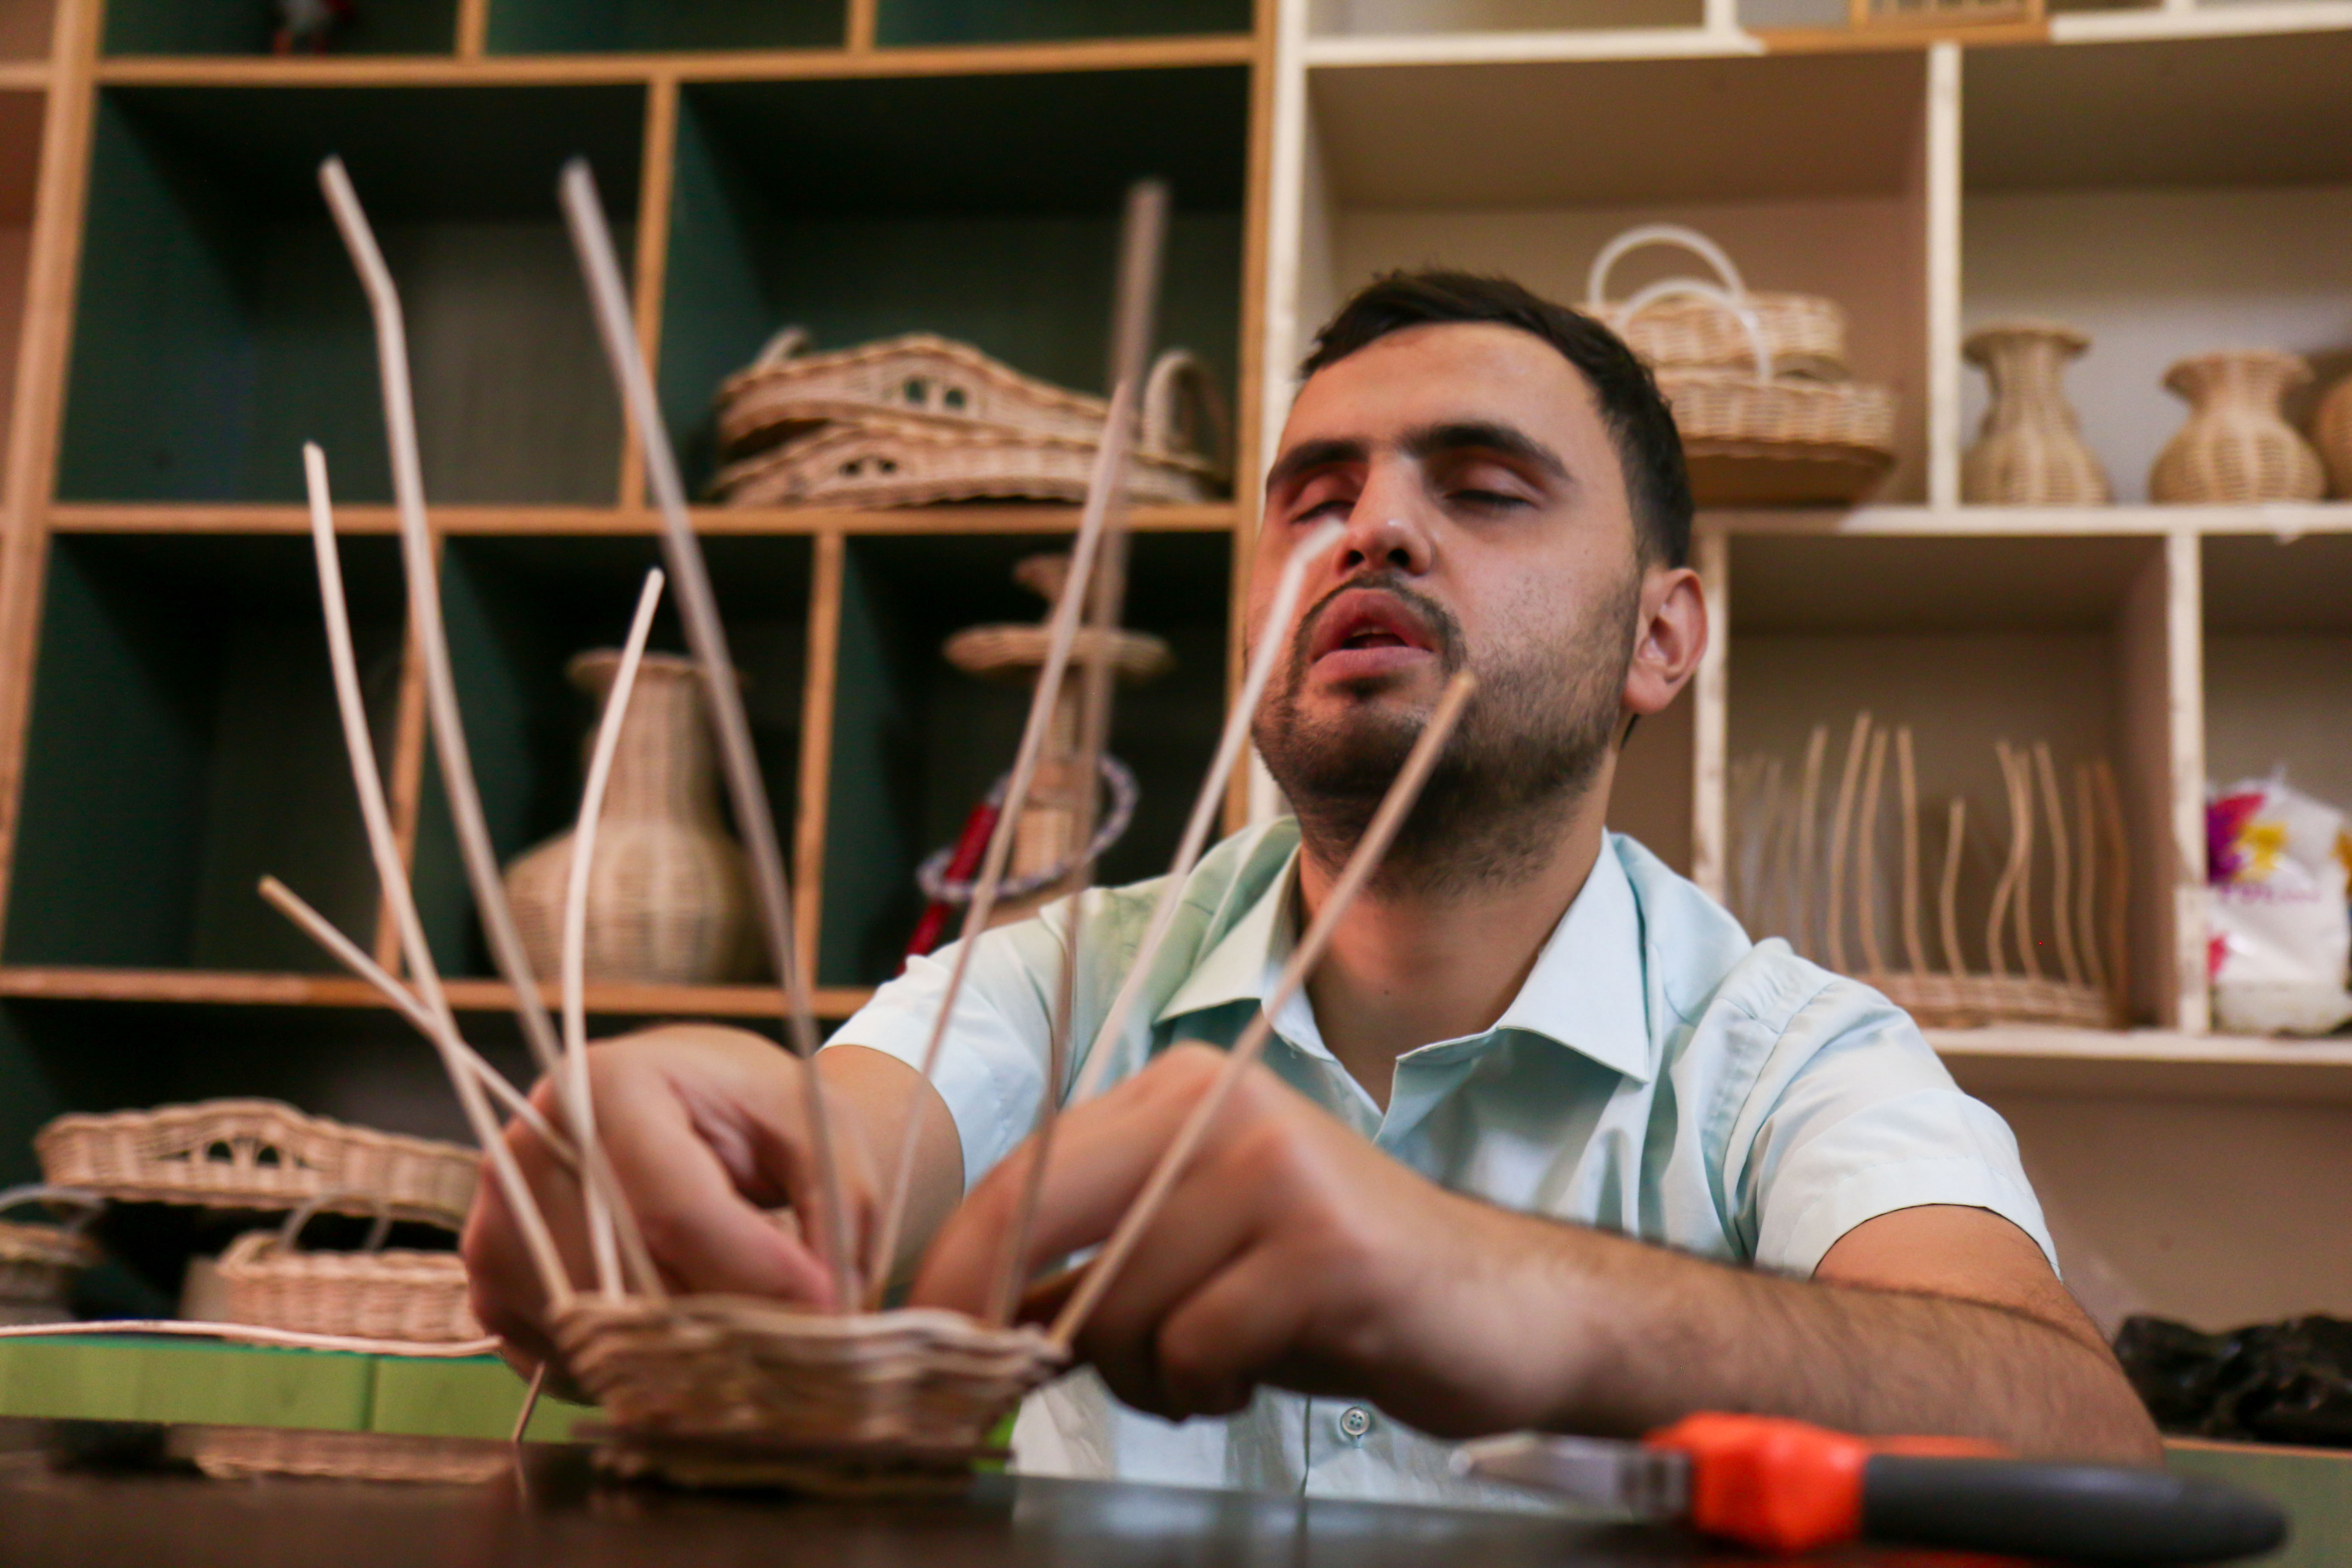 A young man with seeing difficulty from Idlib, Syria is sewing a basket. His craft is displayed at the Craft Exhibition for the Blind organized by the Shafak Organization's Makani Community Center. 